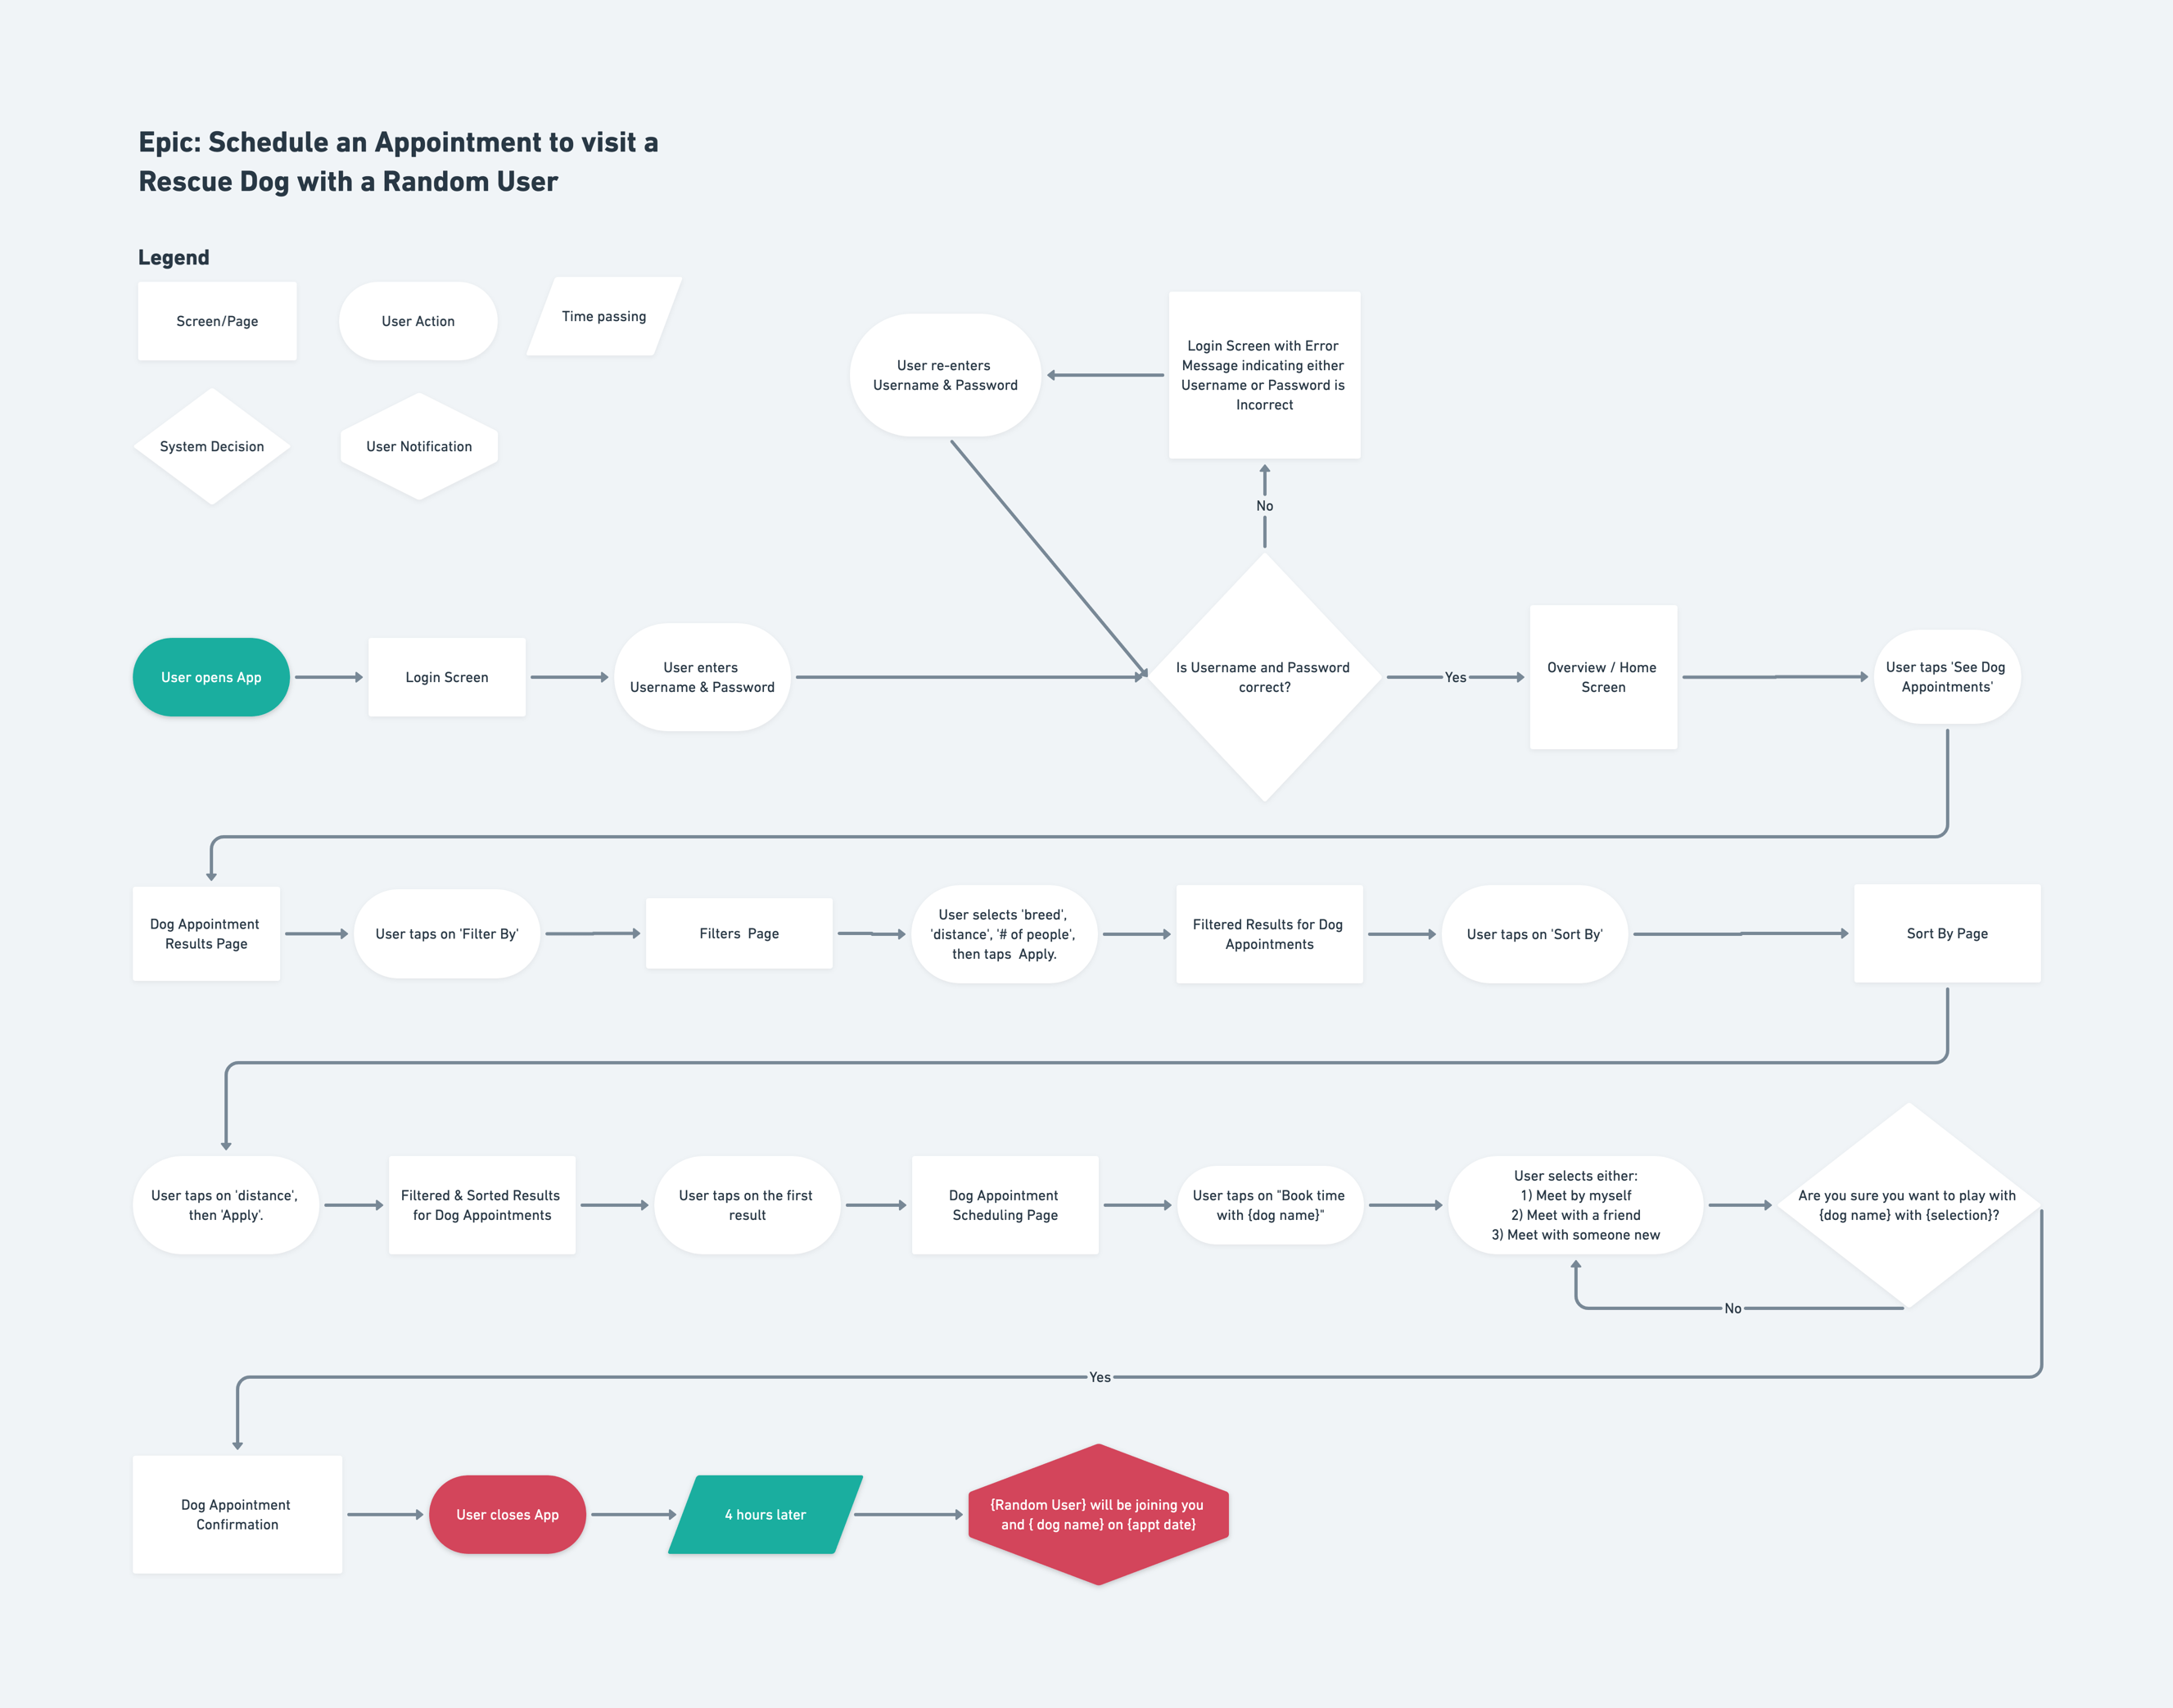 Core Epic Task Flow - Book an Appointment with a Dog and Invite a Random User